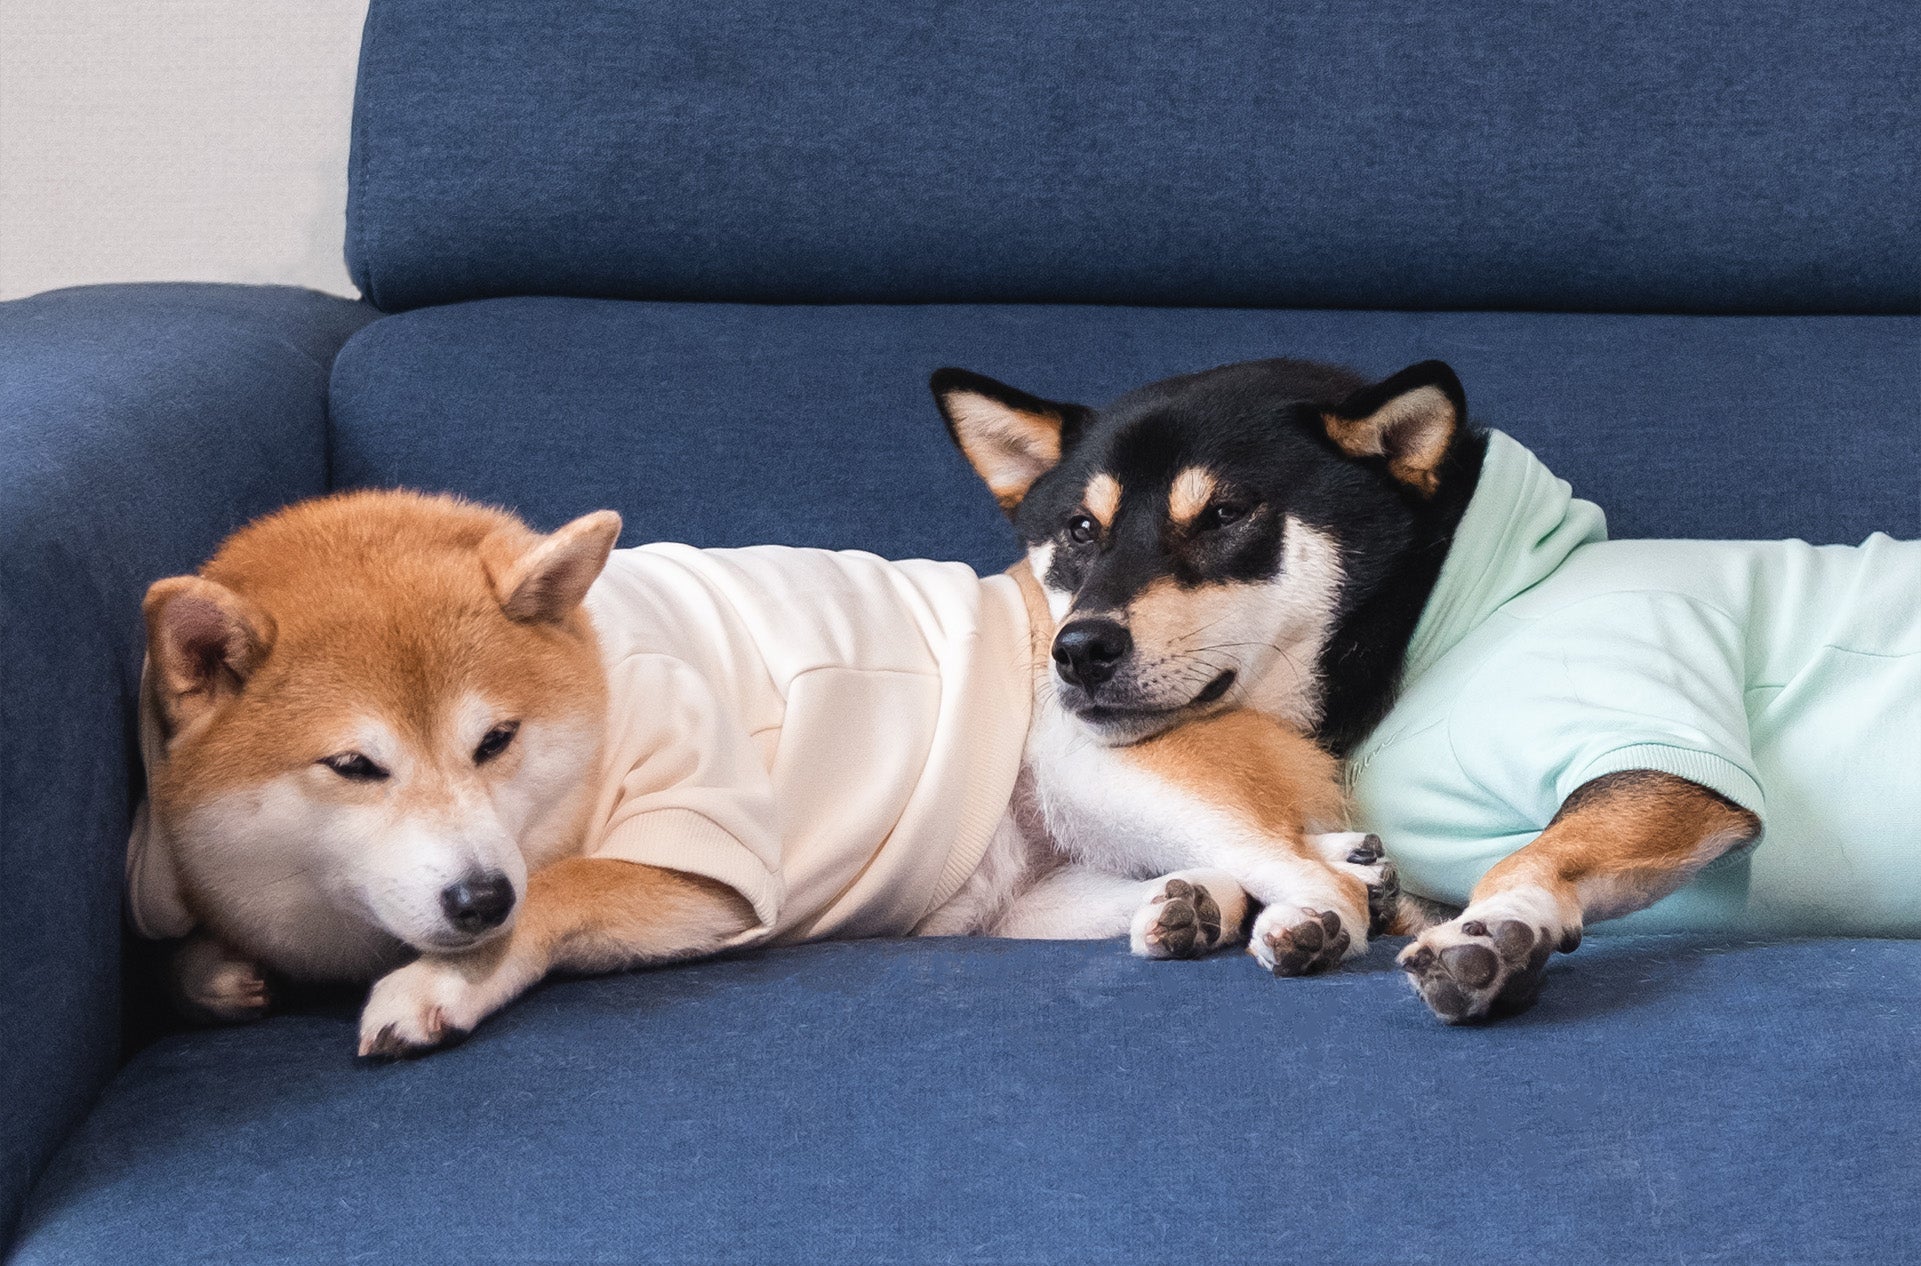 Two dogs resting on a couch wearing Over Glam Pastel Hoodies